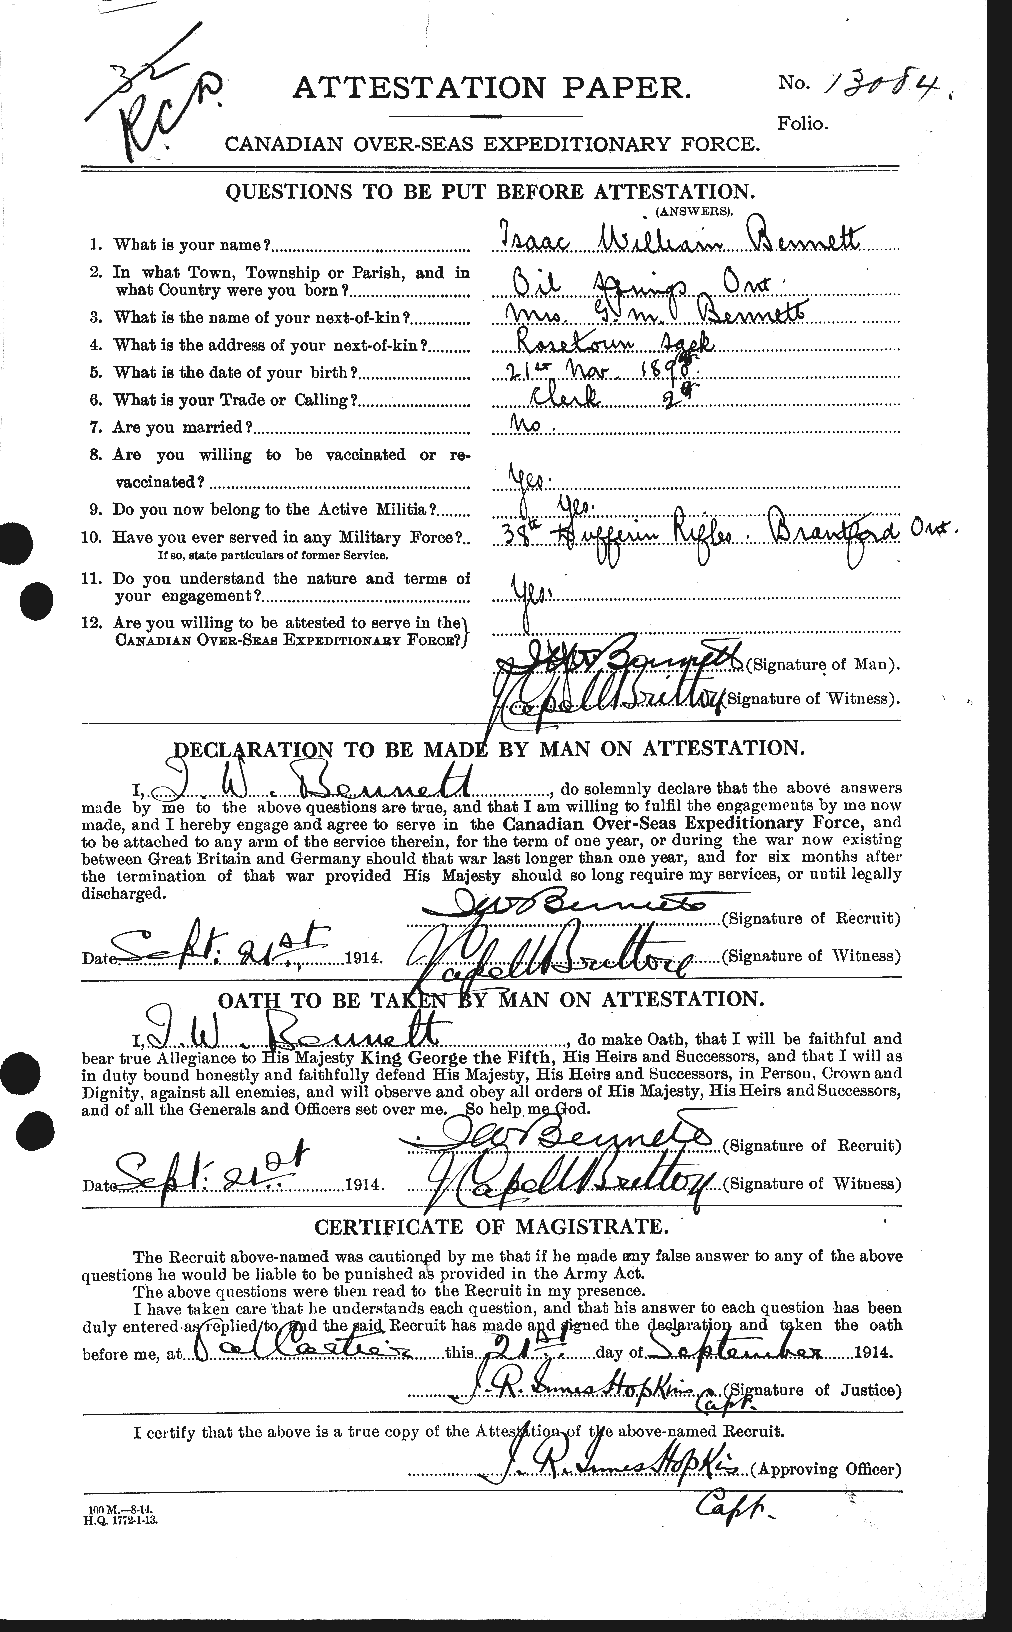 Personnel Records of the First World War - CEF 238519a